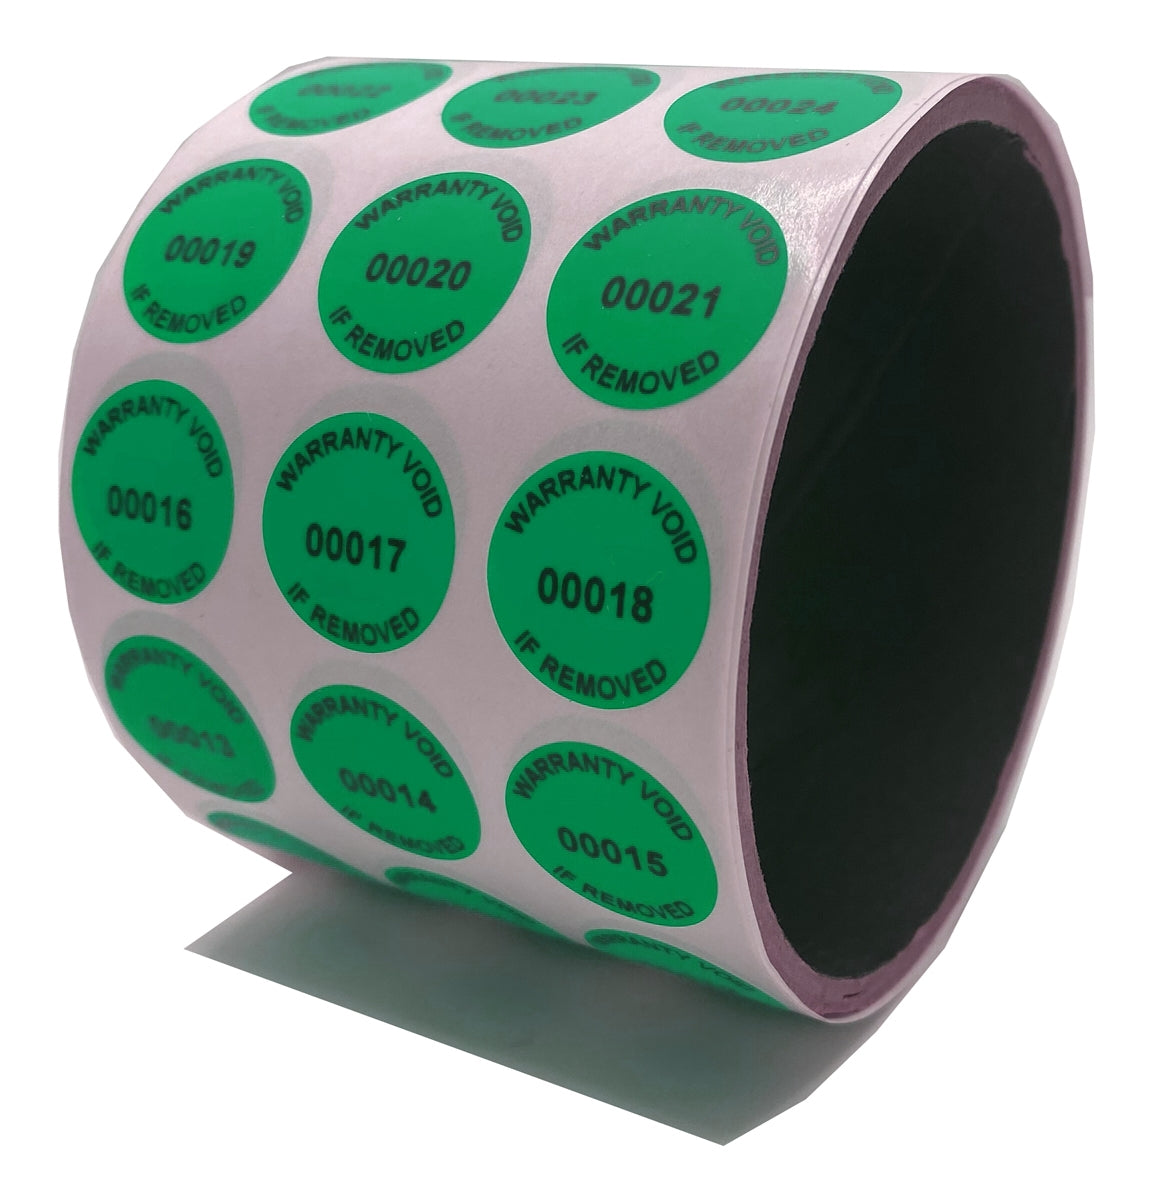 5,000 Tamper-Evident Green Non Residue Security Labels TamperGuard® Seal Sticker, Round/ Circle 0.75" diameter (19mm). Printed: Warranty Void if Removed + Serialized